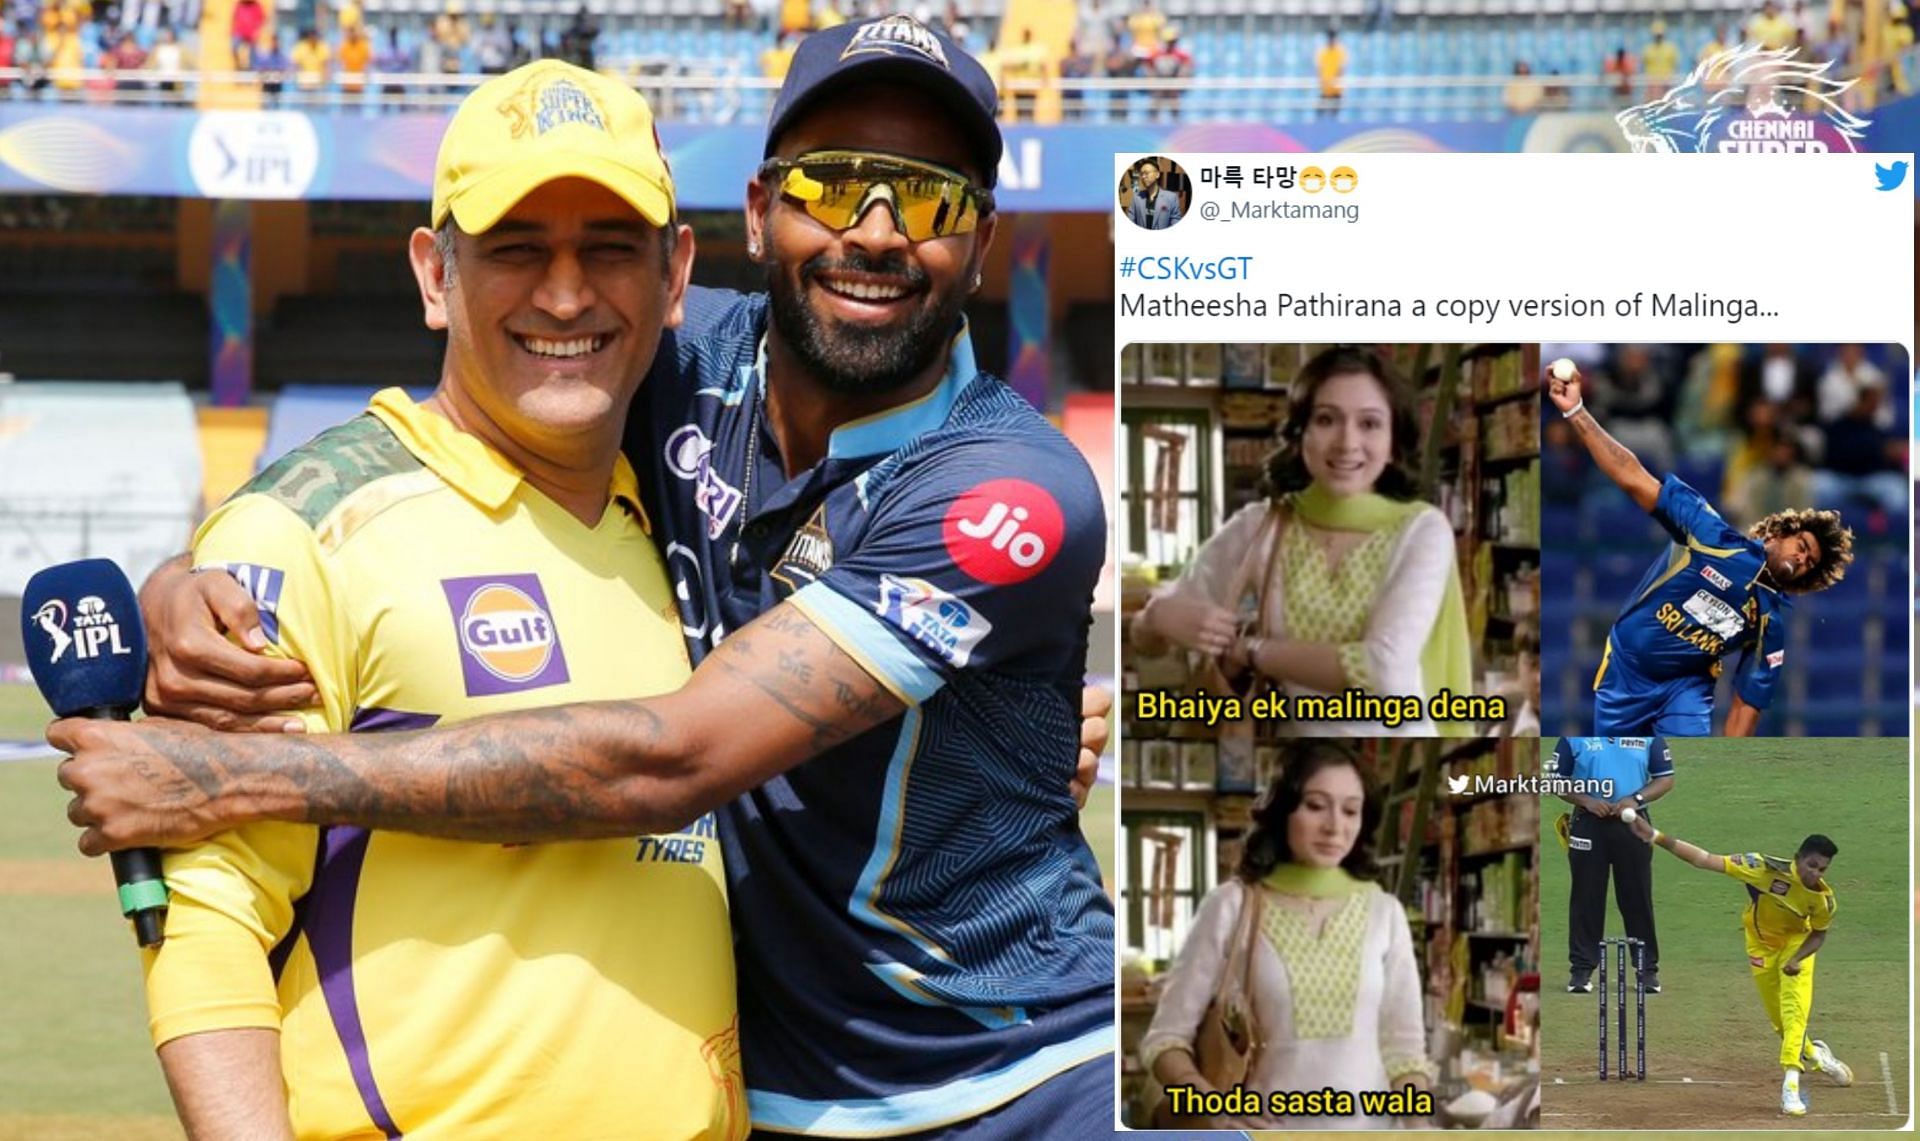 GT vs CSK memes, IPL 2022: Top 10 funny memes from today's match